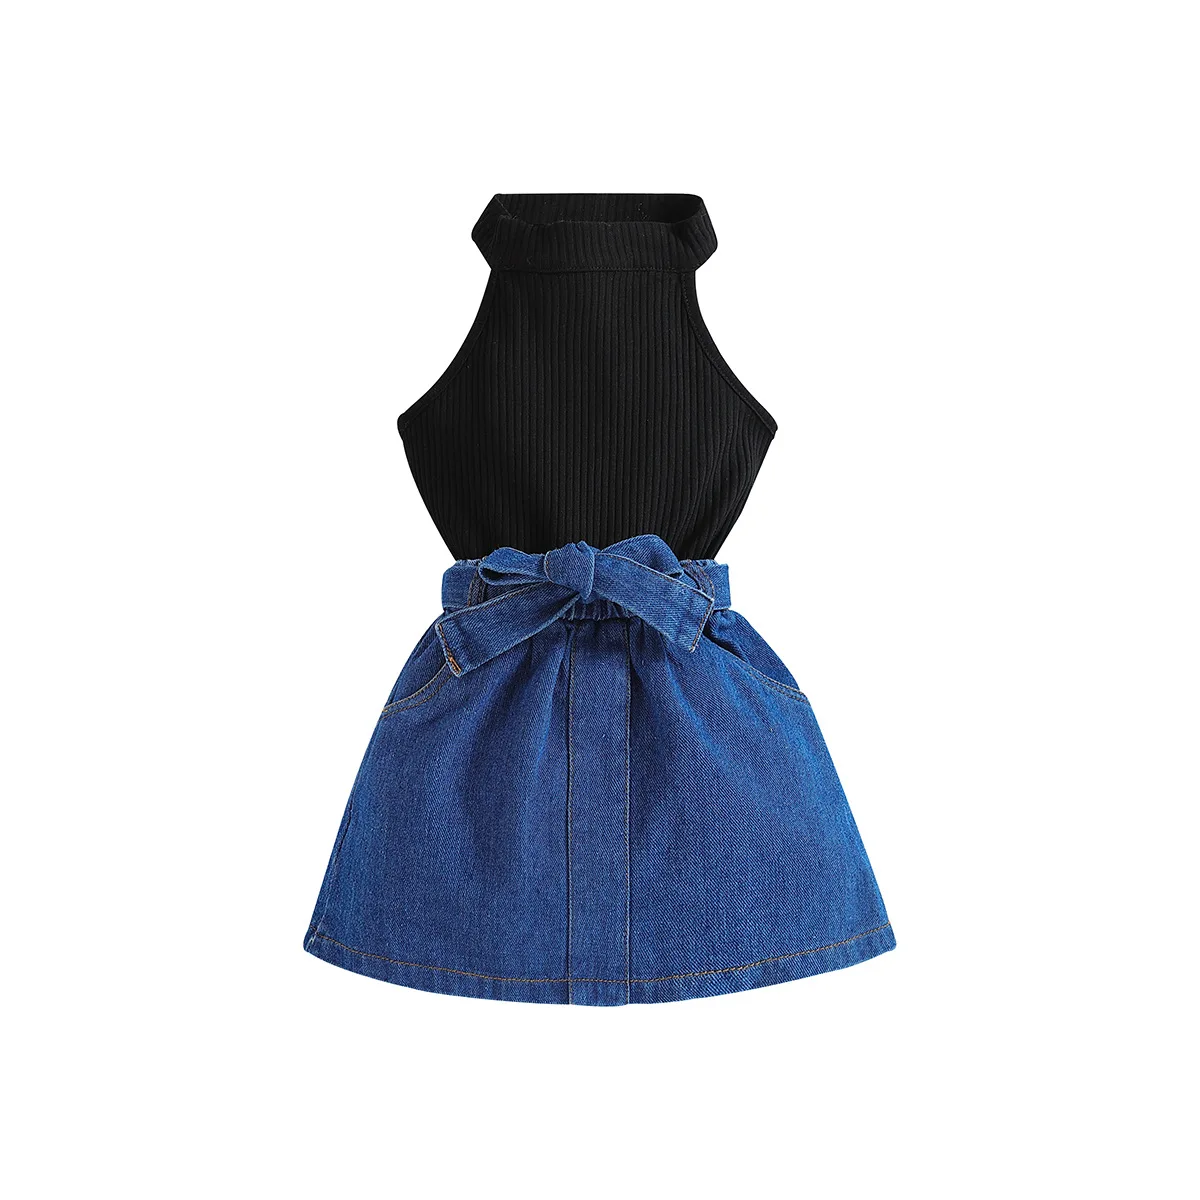 New casual children's clothing sleeveless pit strip vest+denim skirt two piece boutique kids clothing girls outfits